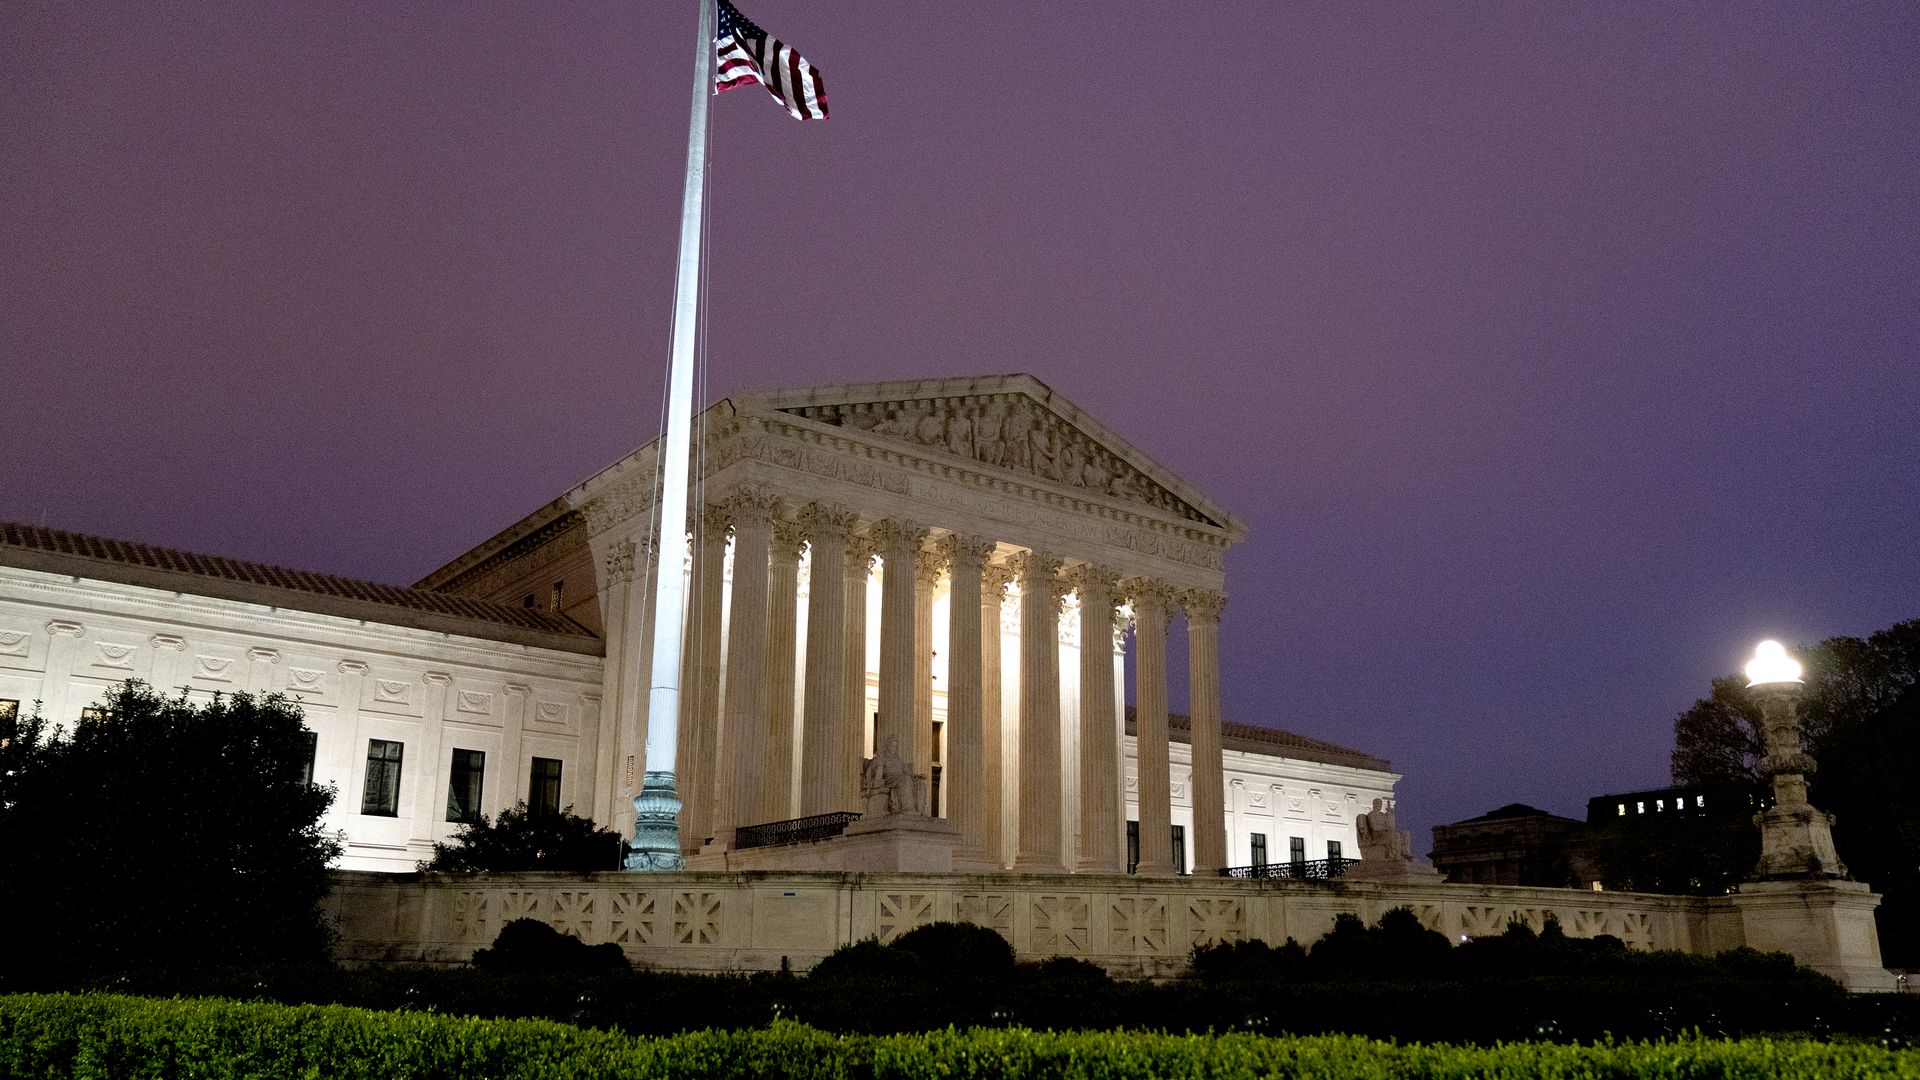 Picture of the U.S. Supreme Court building taken at night time